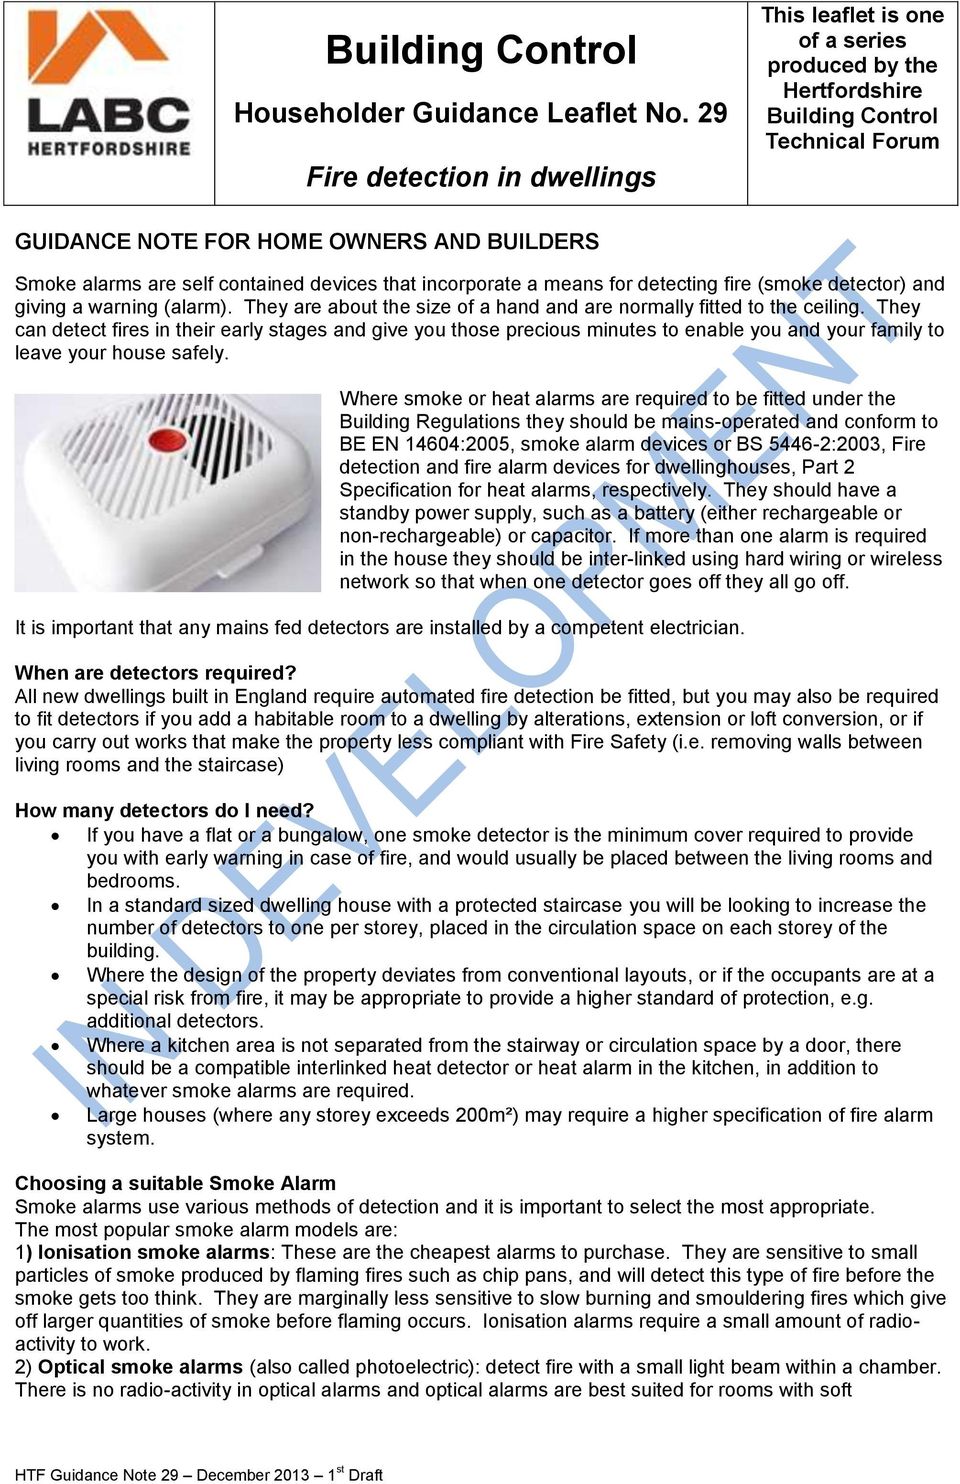 contained devices that incorporate a means for detecting fire (smoke detector) and giving a warning (alarm). They are about the size of a hand and are normally fitted to the ceiling.